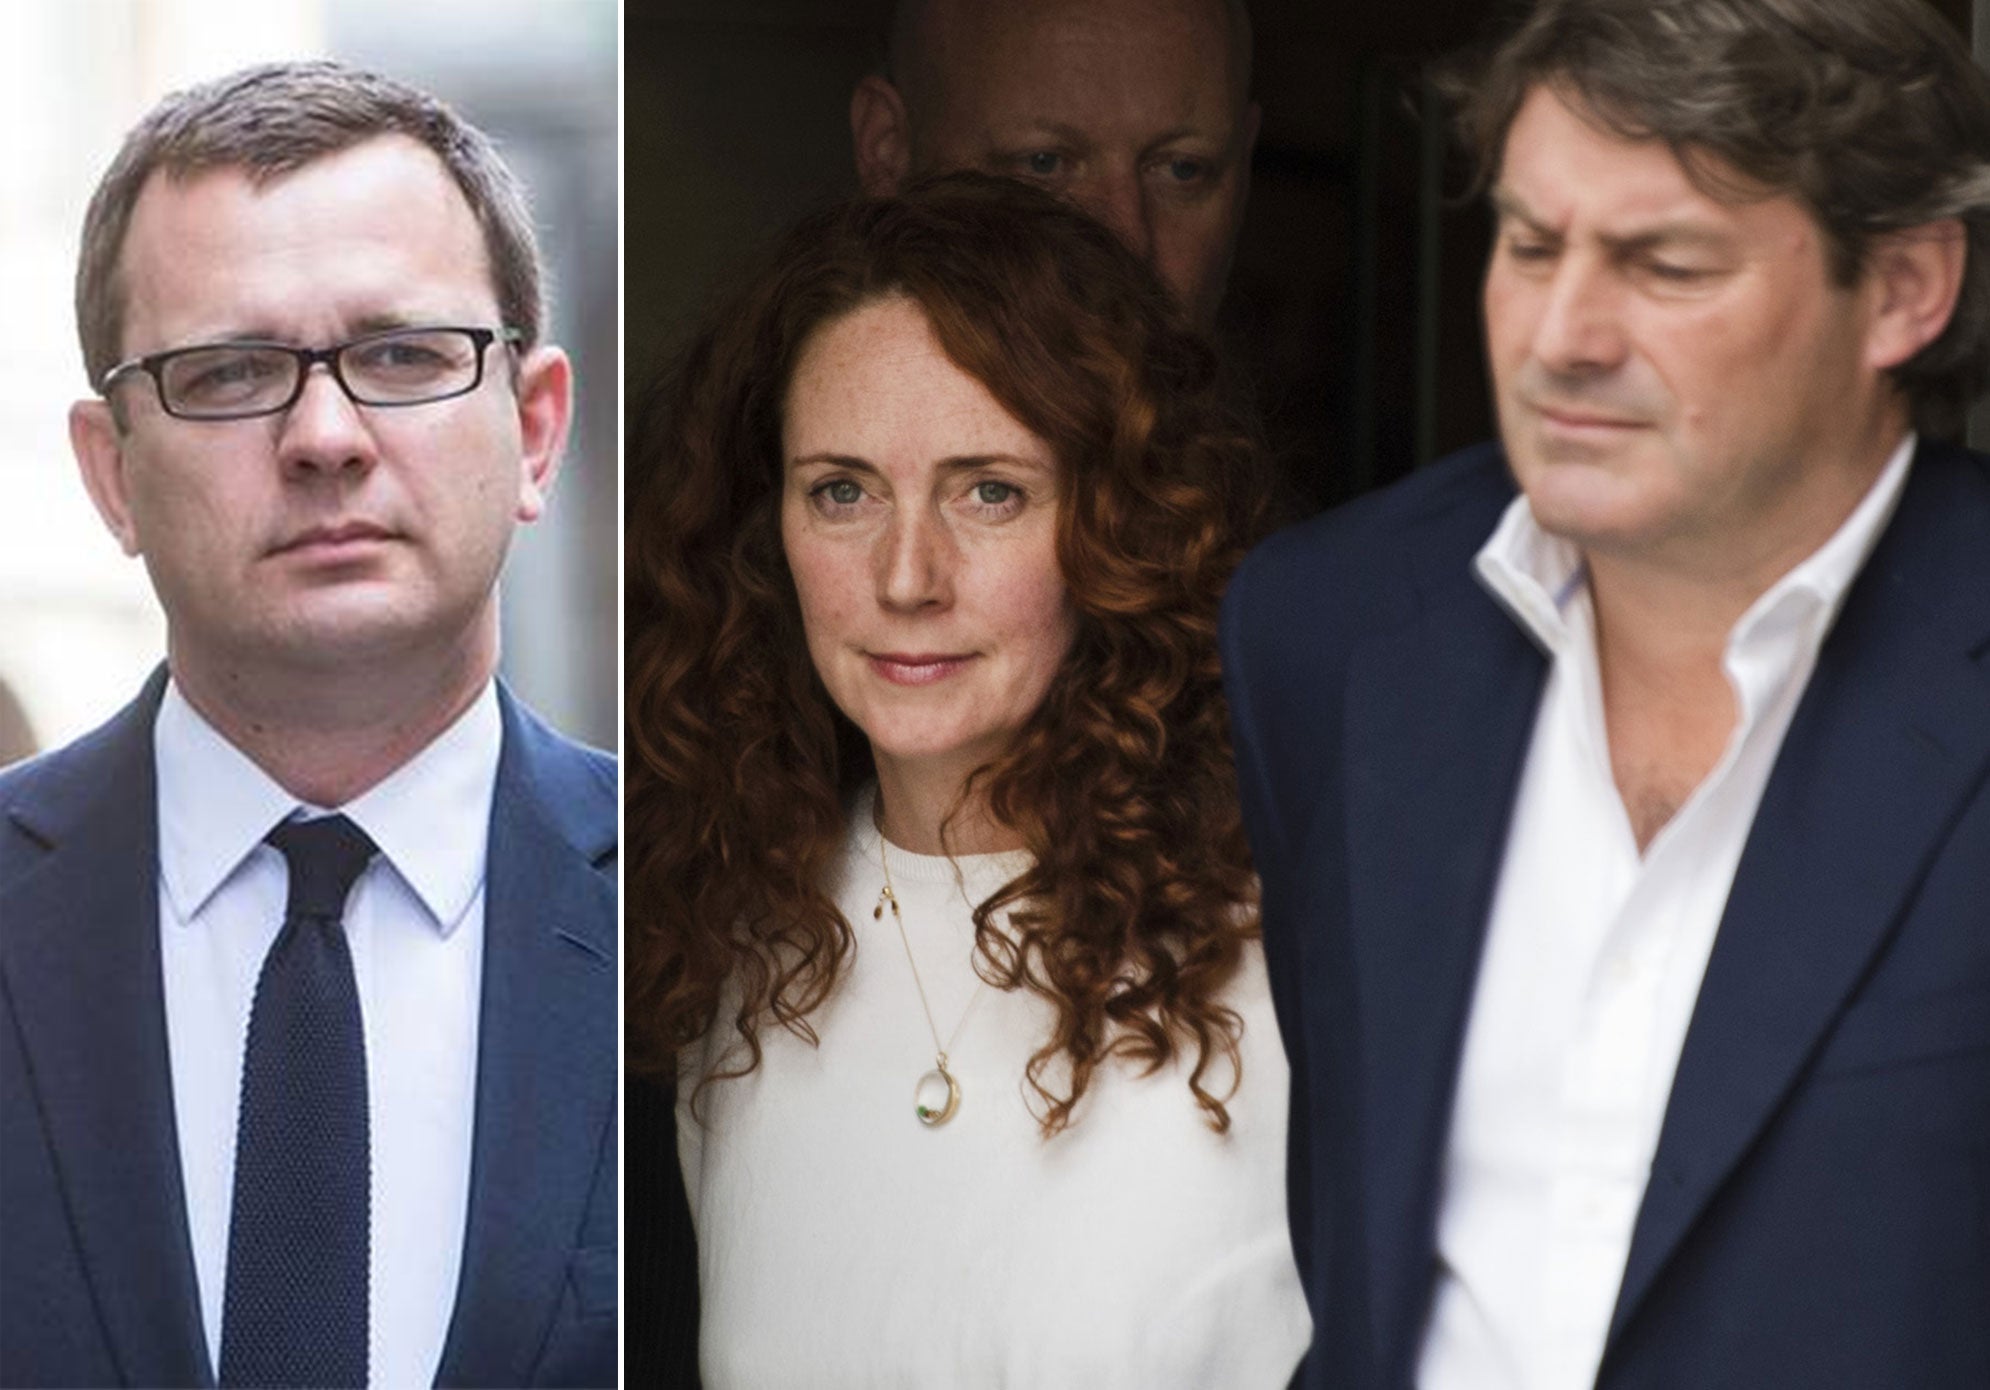 Andy Coulson, left, has been found guilty of conspiracy to hack phones, while Rebekah Brooks and her husband Charlie were cleared of all charges